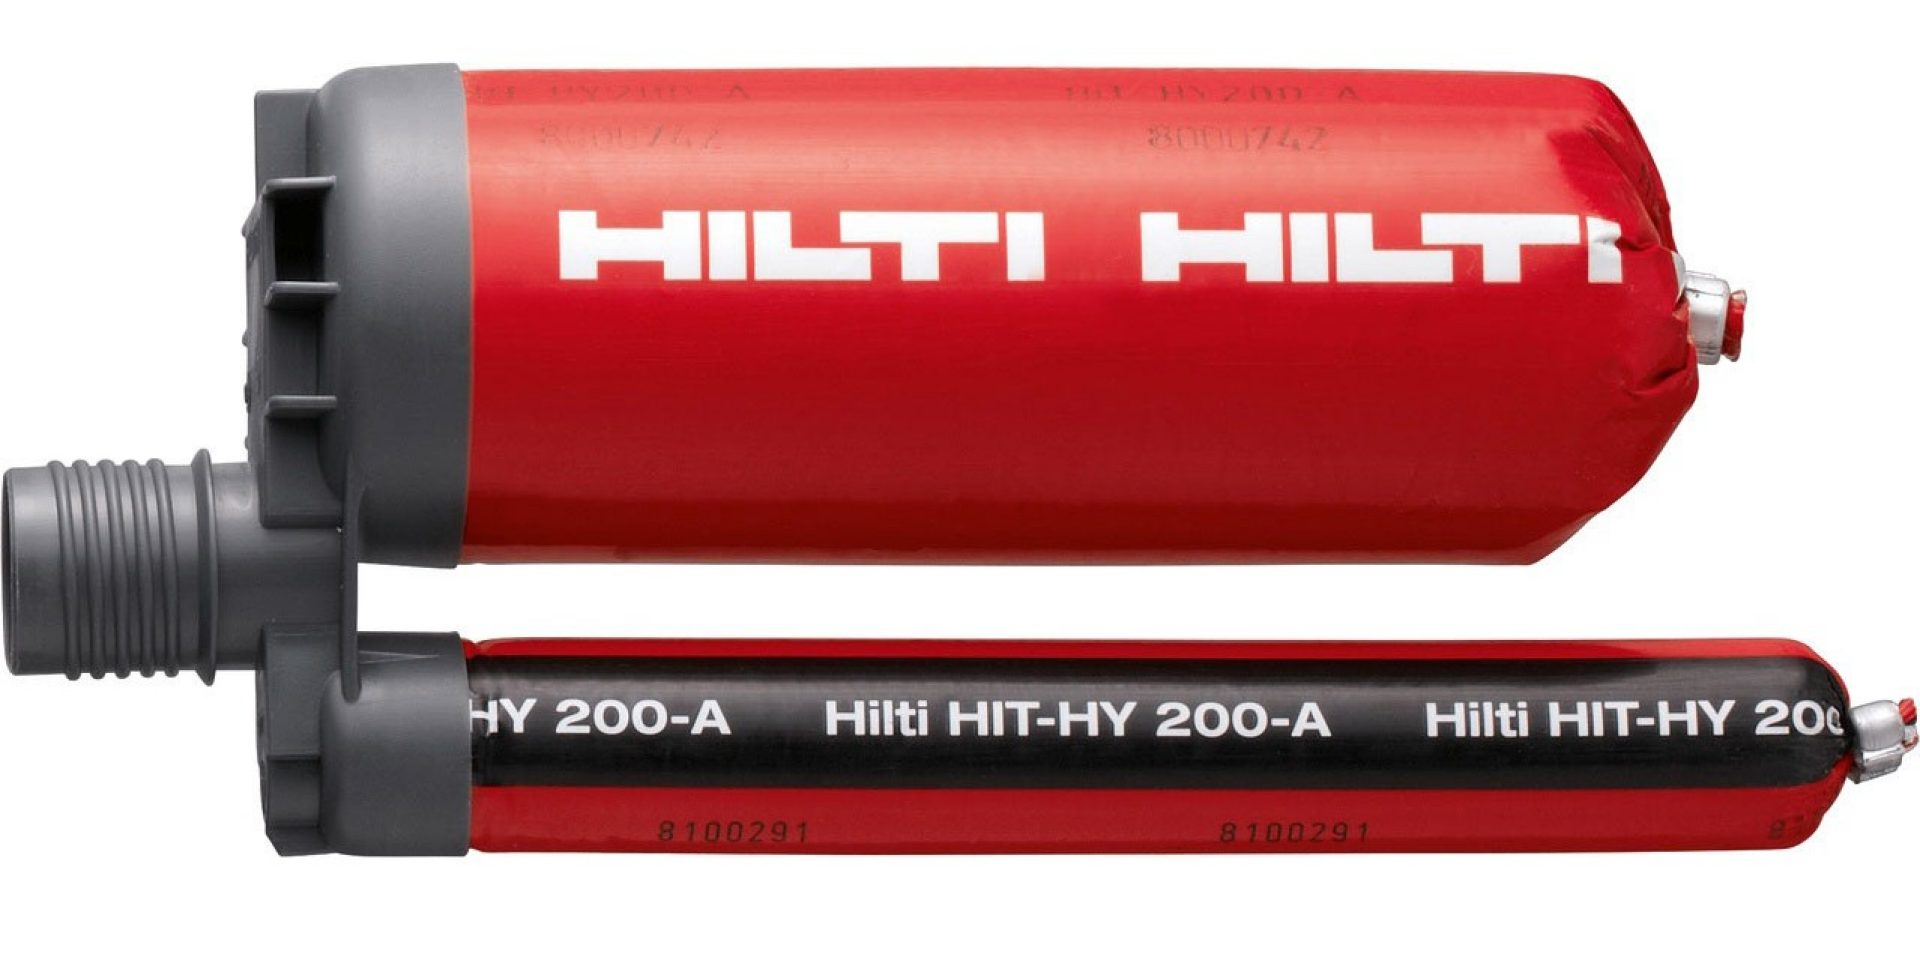 Hilti HIT-HY 200 injectable mortar